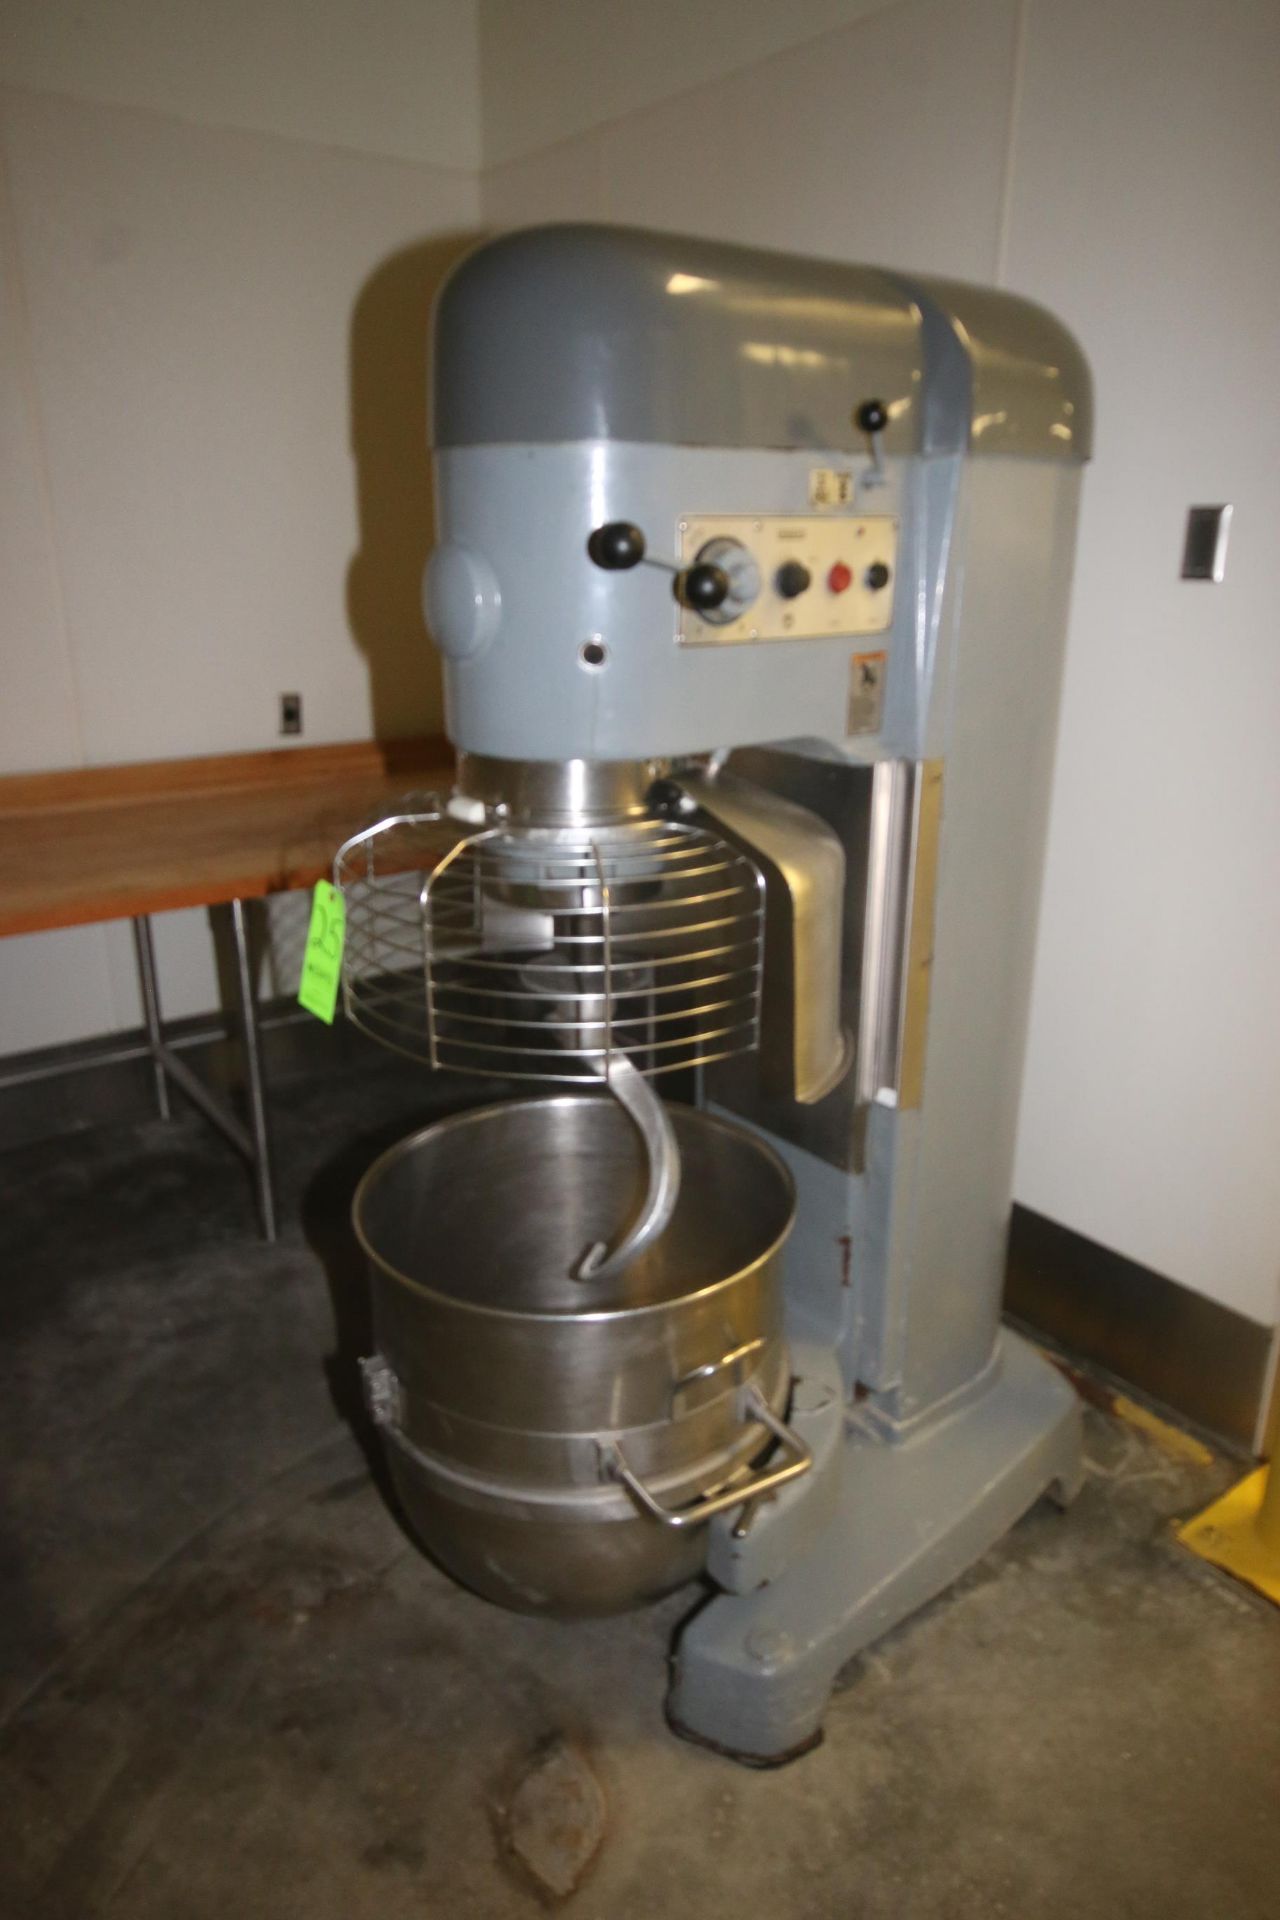 Hobart Mixer, M/N V1401, S/N 31-1355-104, with 5 hp Motor, 1750 RPM, 200 Volts, 3 Phase, with S/S